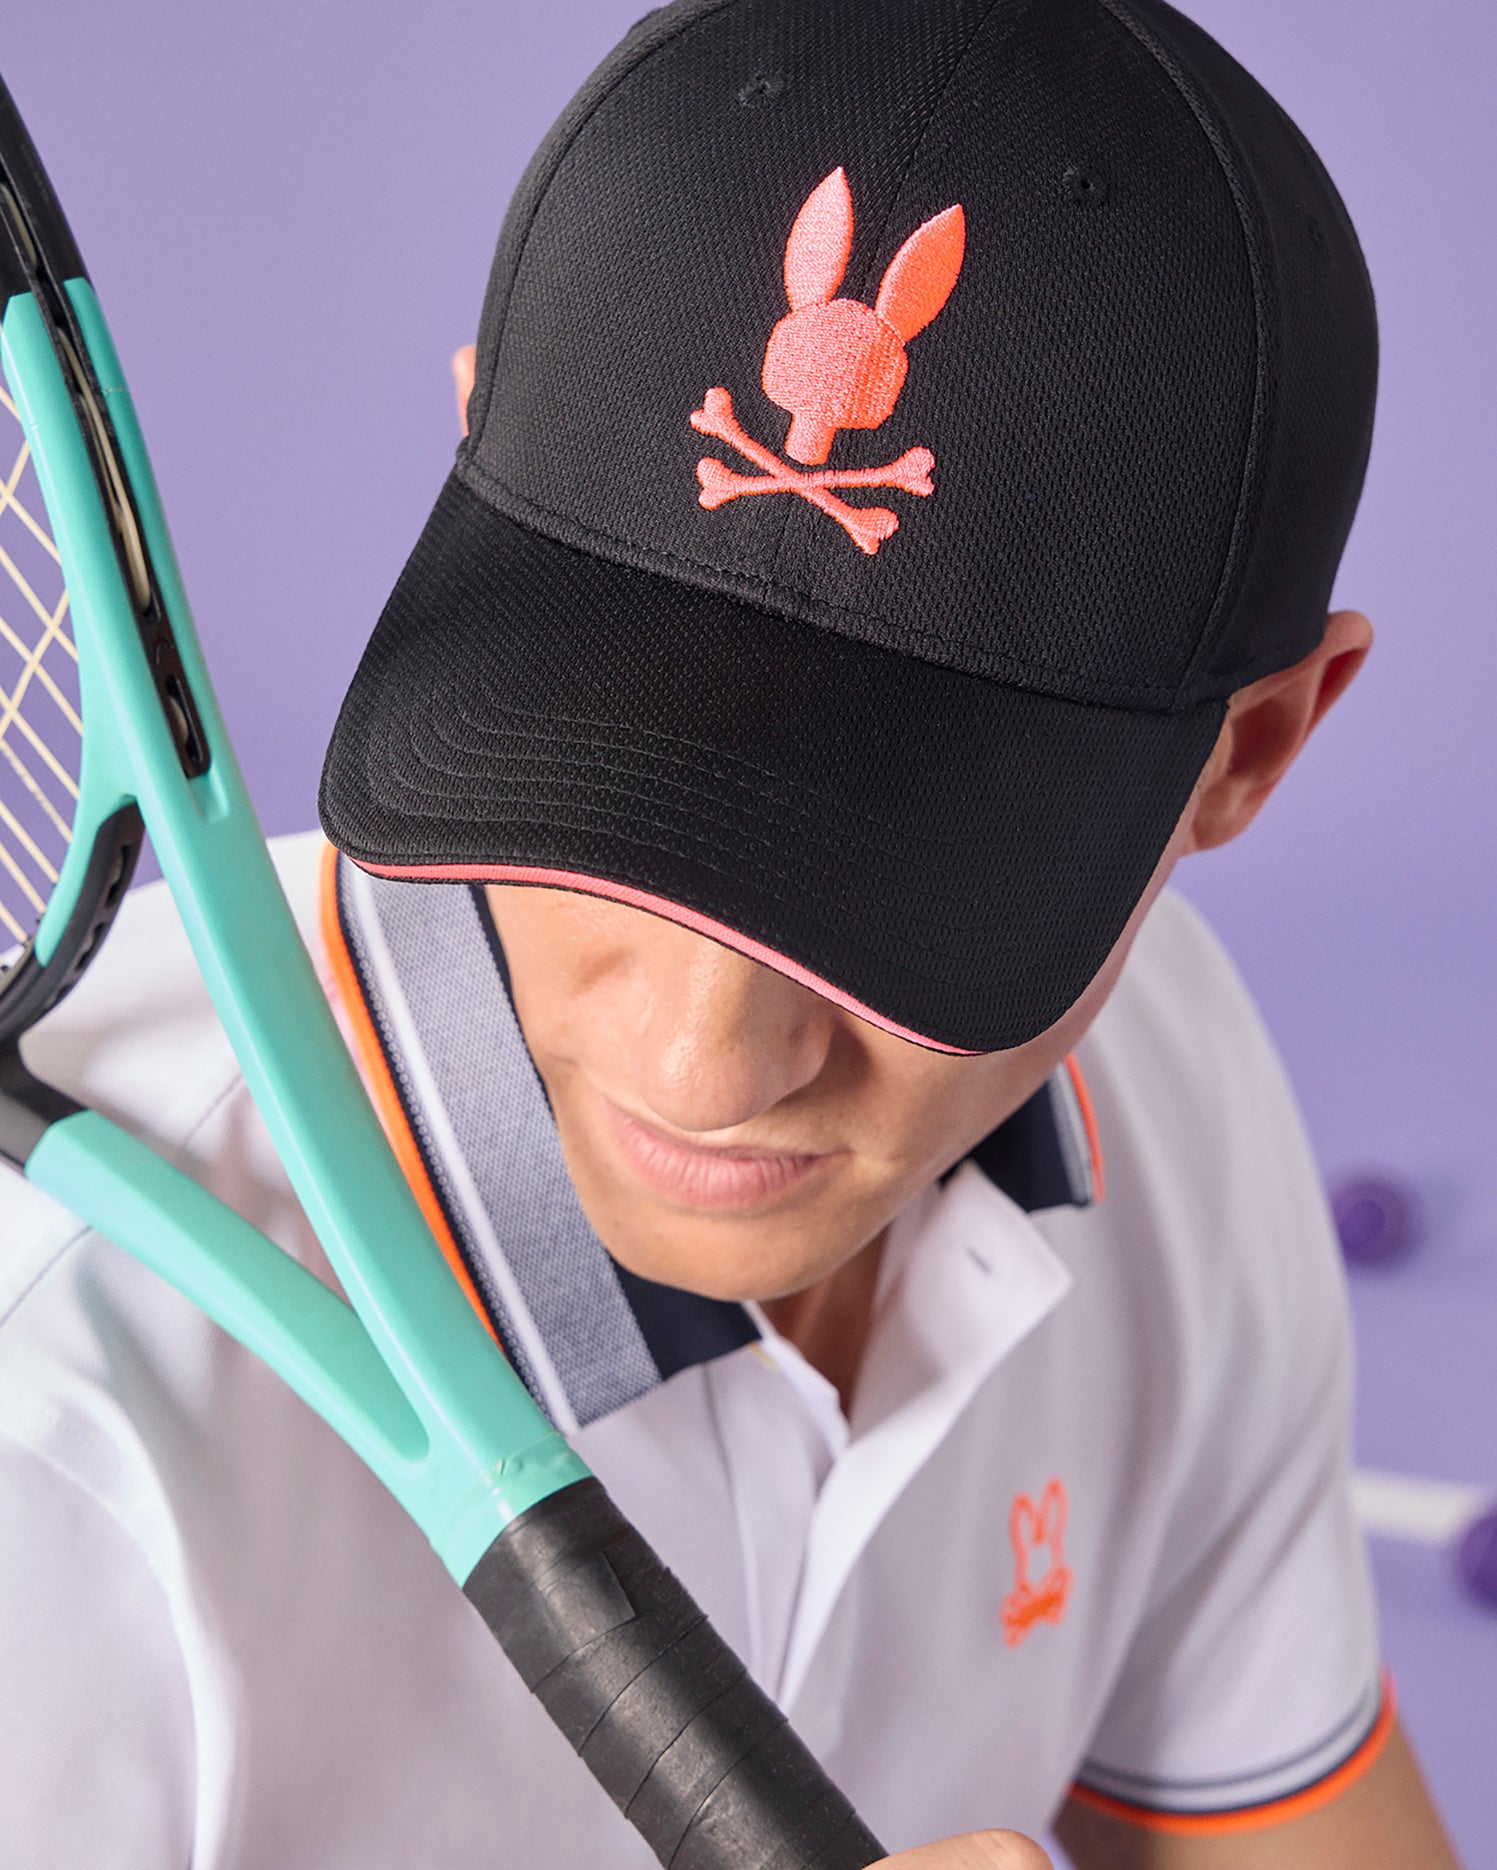 A person wearing a Psycho Bunny MENS DOVER SPORT CAP with a pink bunny logo, partially visible, holding a tennis racket close to their face. They are dressed in a white polo with contrasting orange and gray trim.